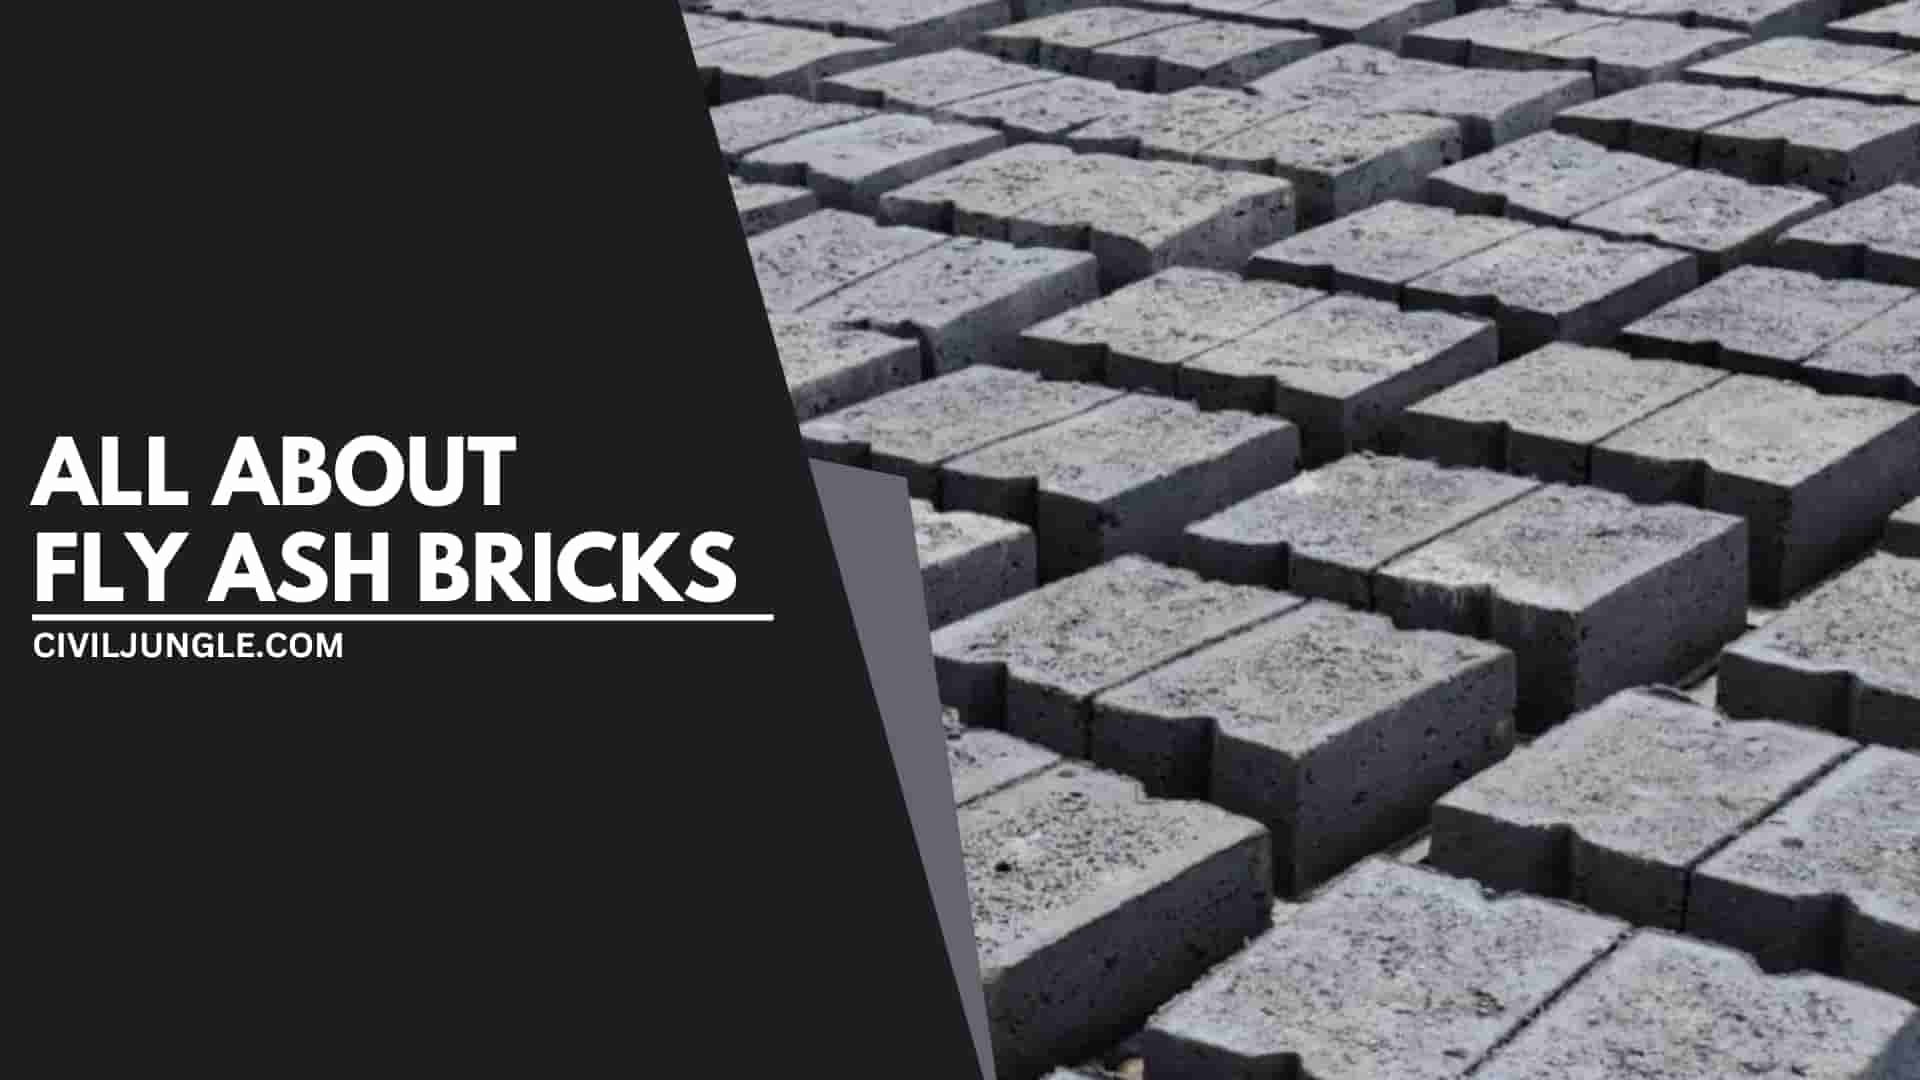 All About Fly Ash Bricks